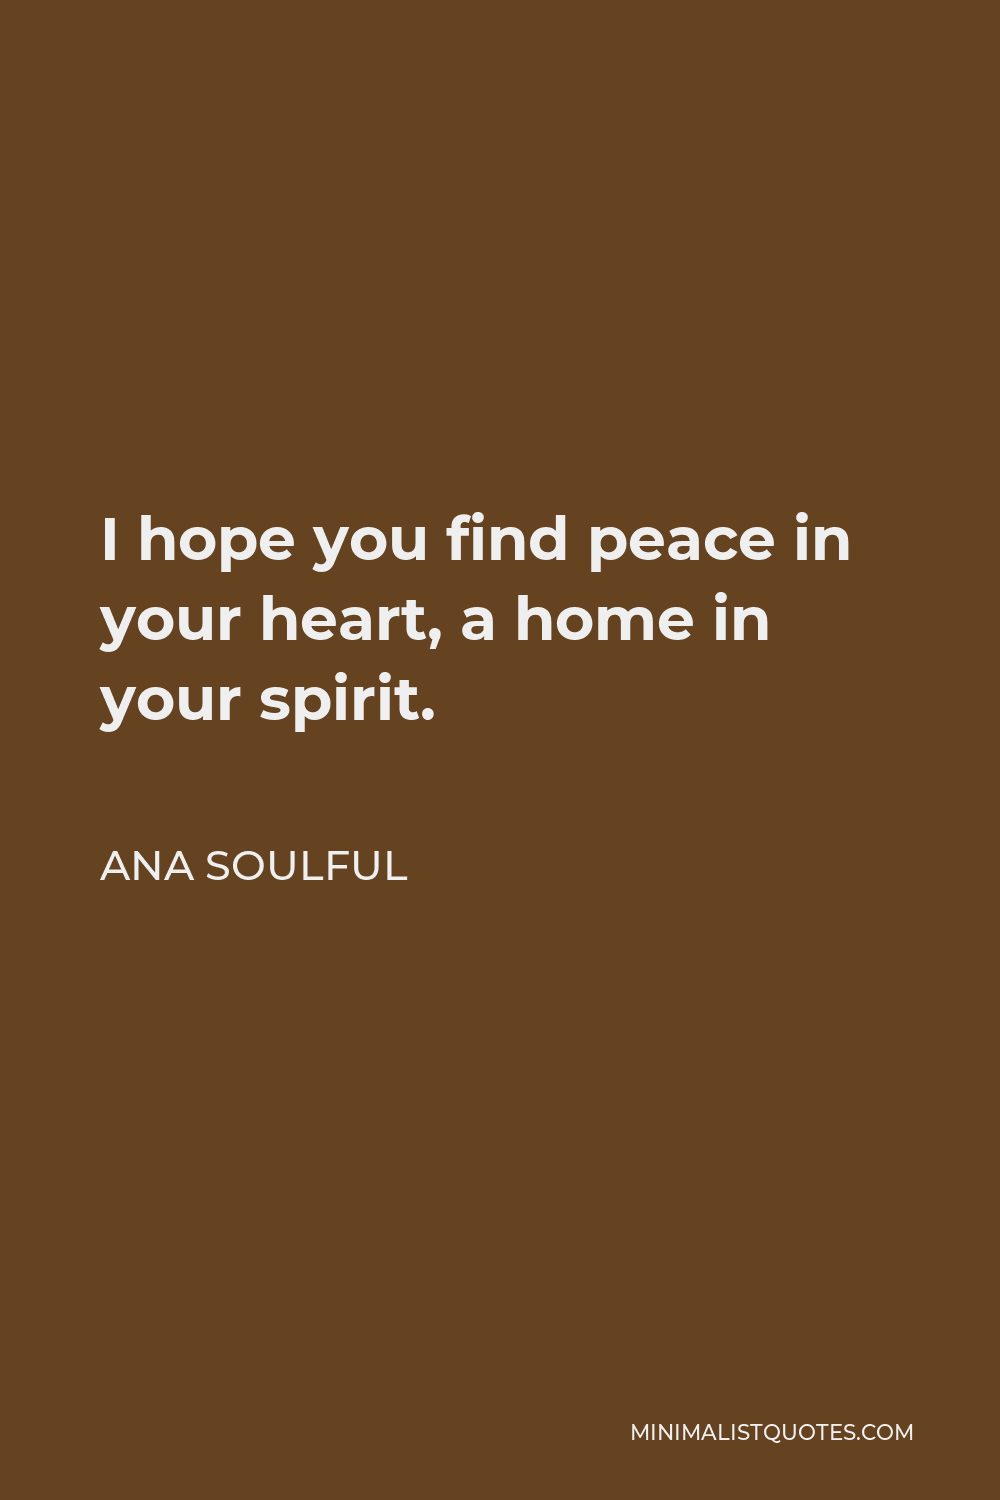 Ana Soulful Quote - I hope you find peace in your heart, a home in your spirit.